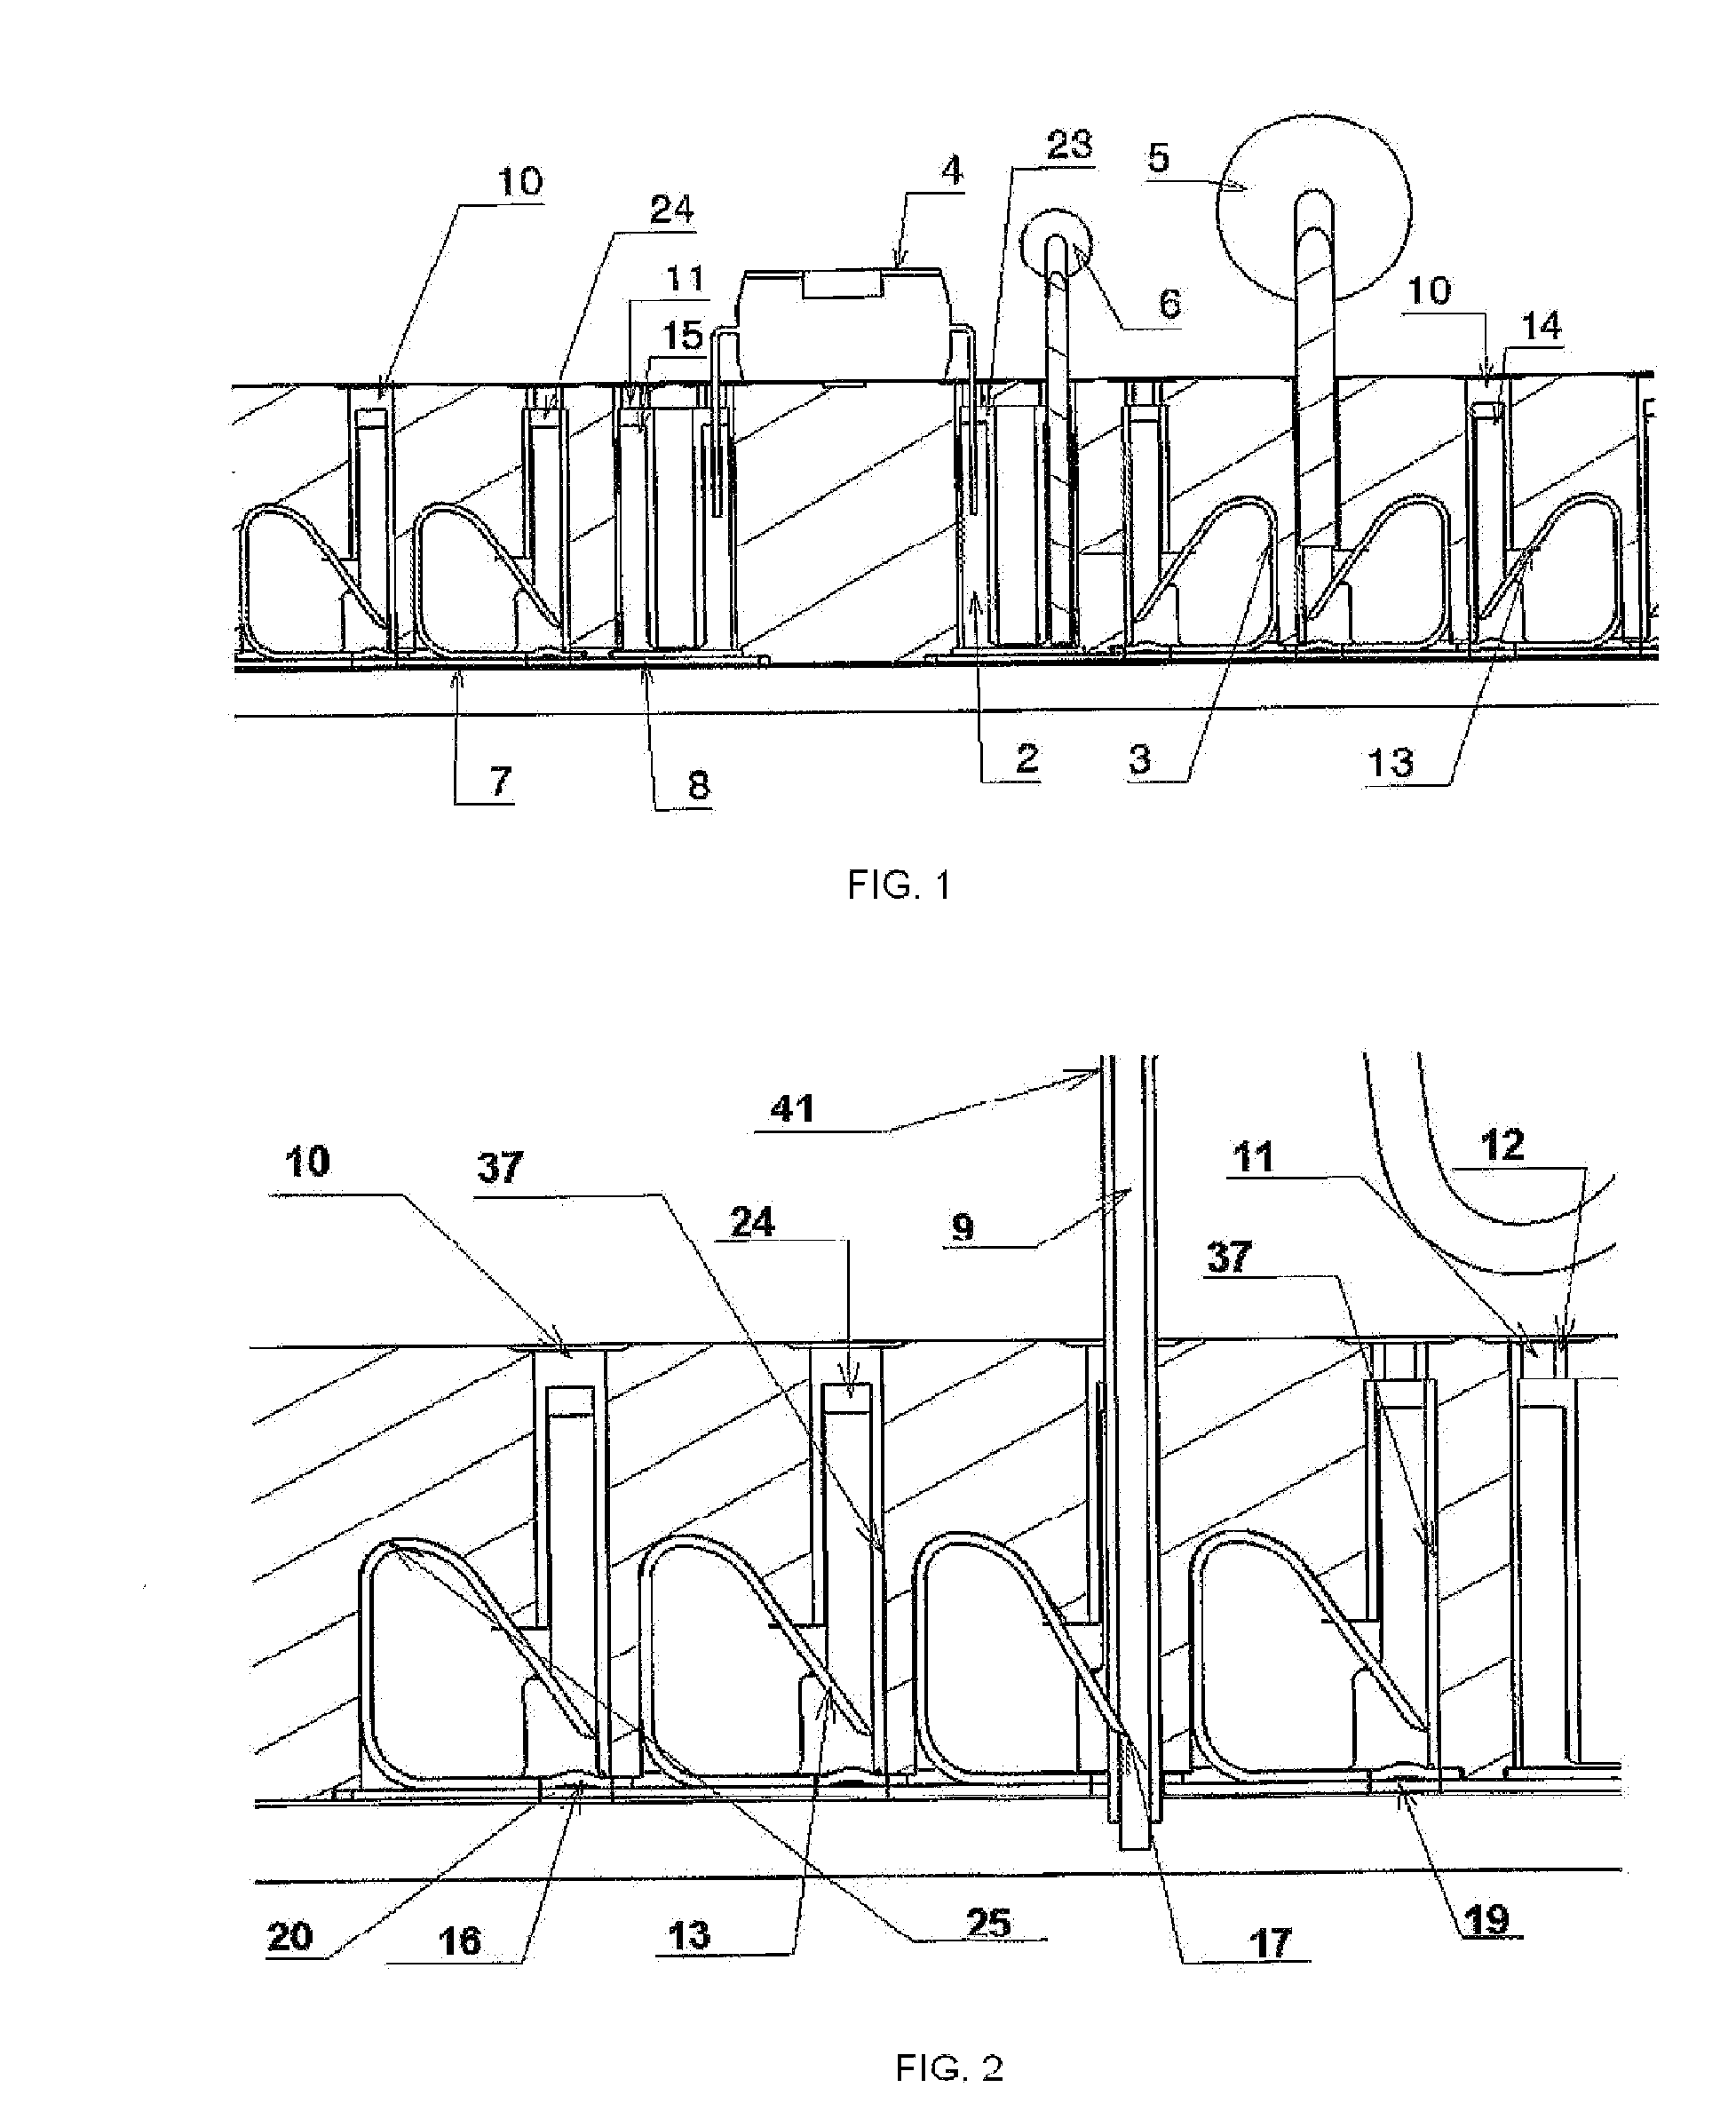 Card for interconnecting electronic components using insulated cable or wire